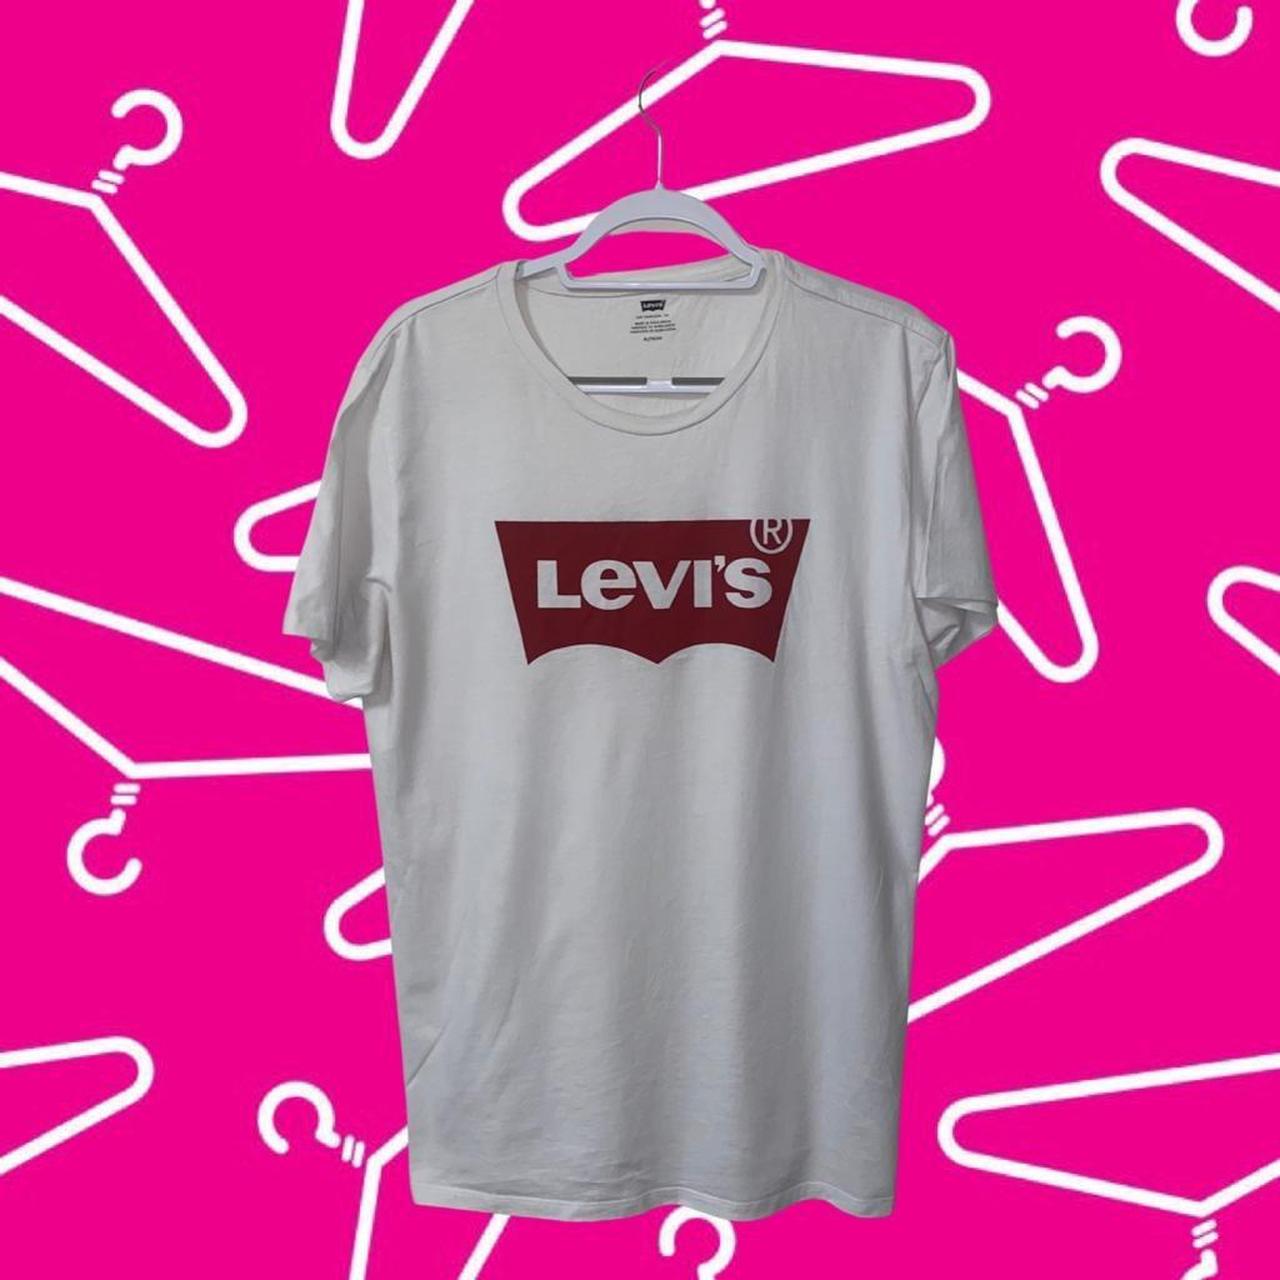 Levi's Men's White and Red T-shirt | Depop